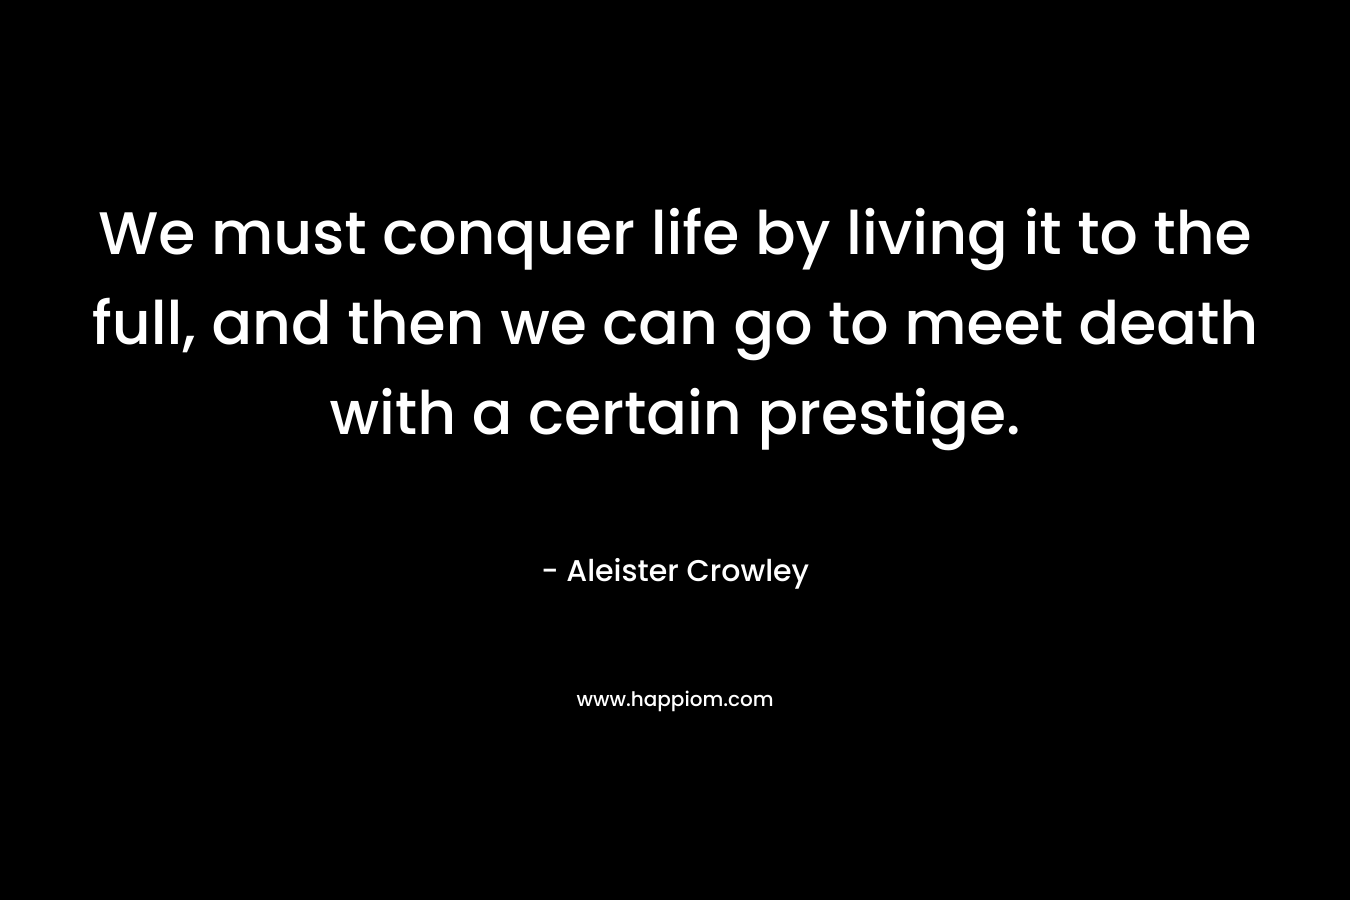 We must conquer life by living it to the full, and then we can go to meet death with a certain prestige. – Aleister Crowley